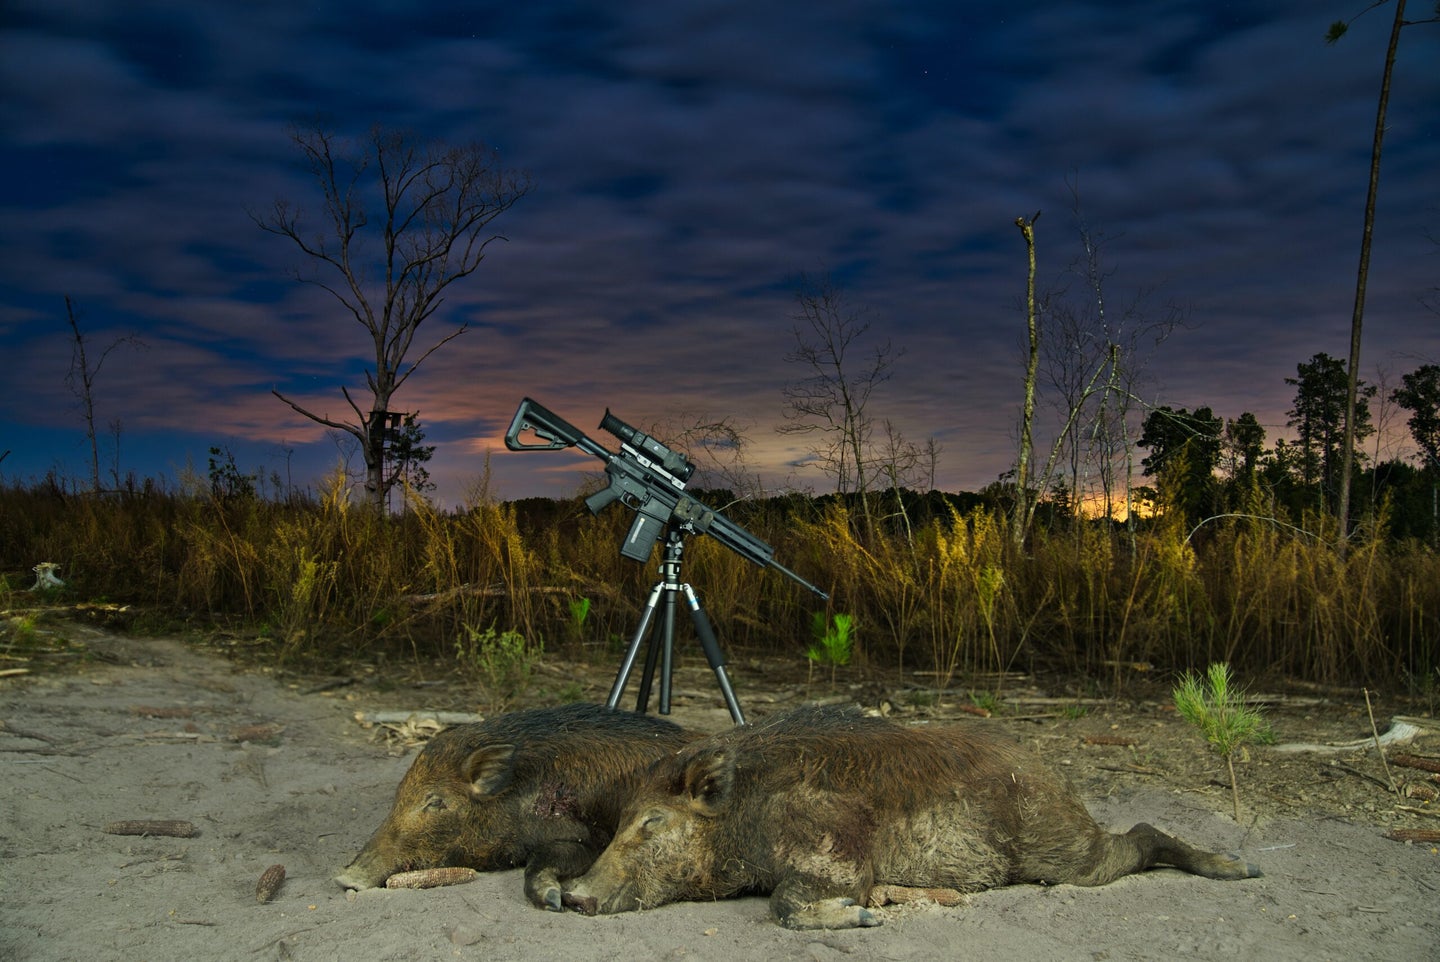 two hogs next to rifle